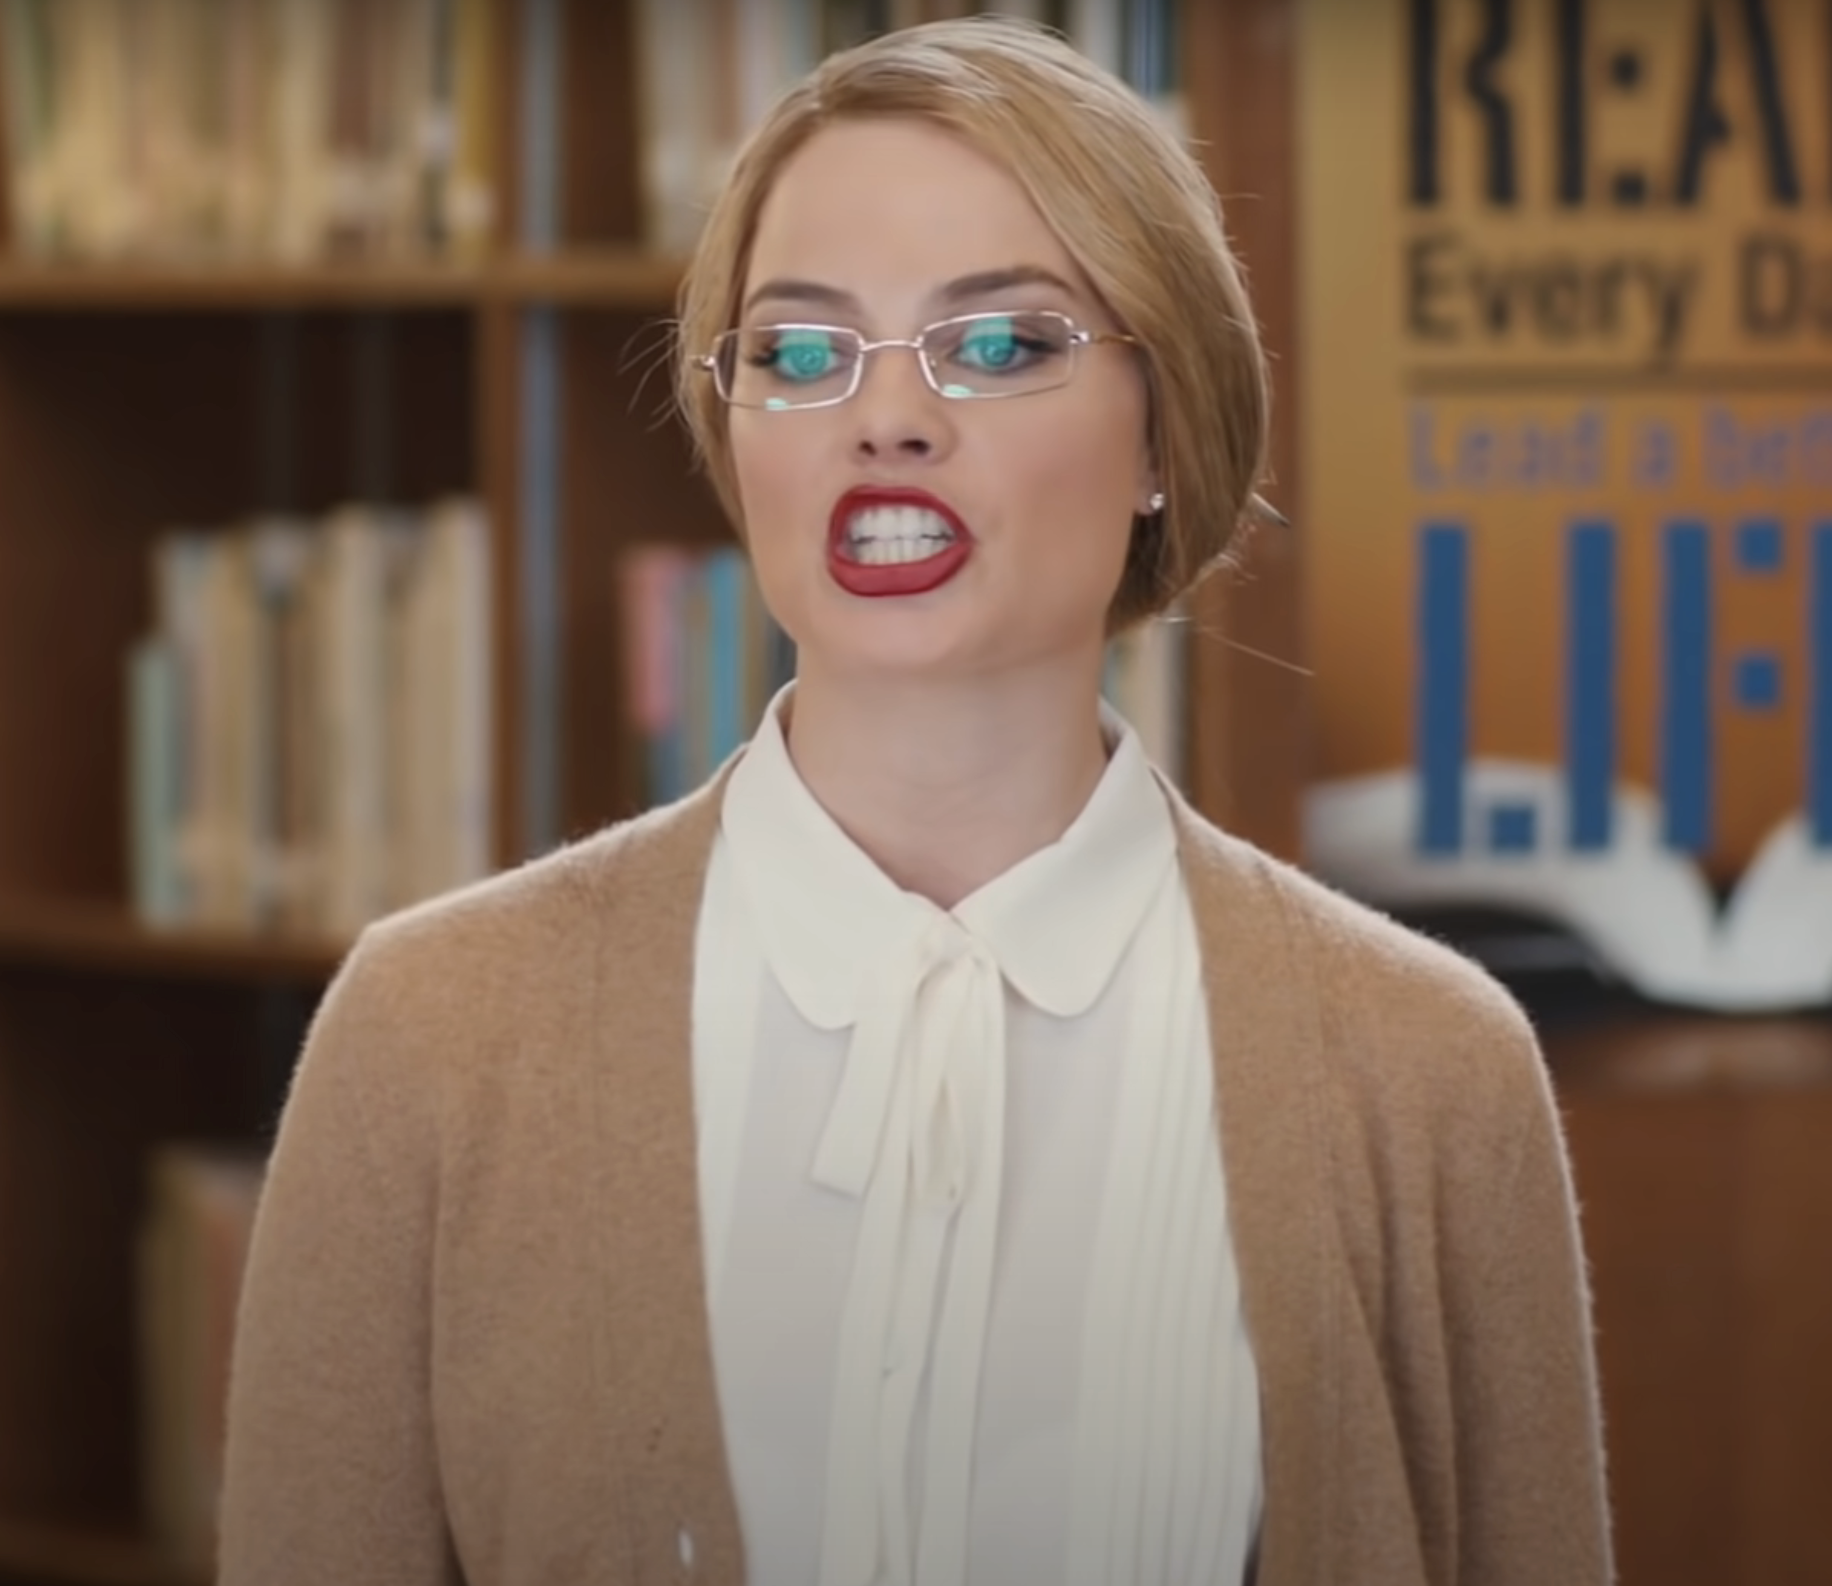 A woman dressed like a librarian